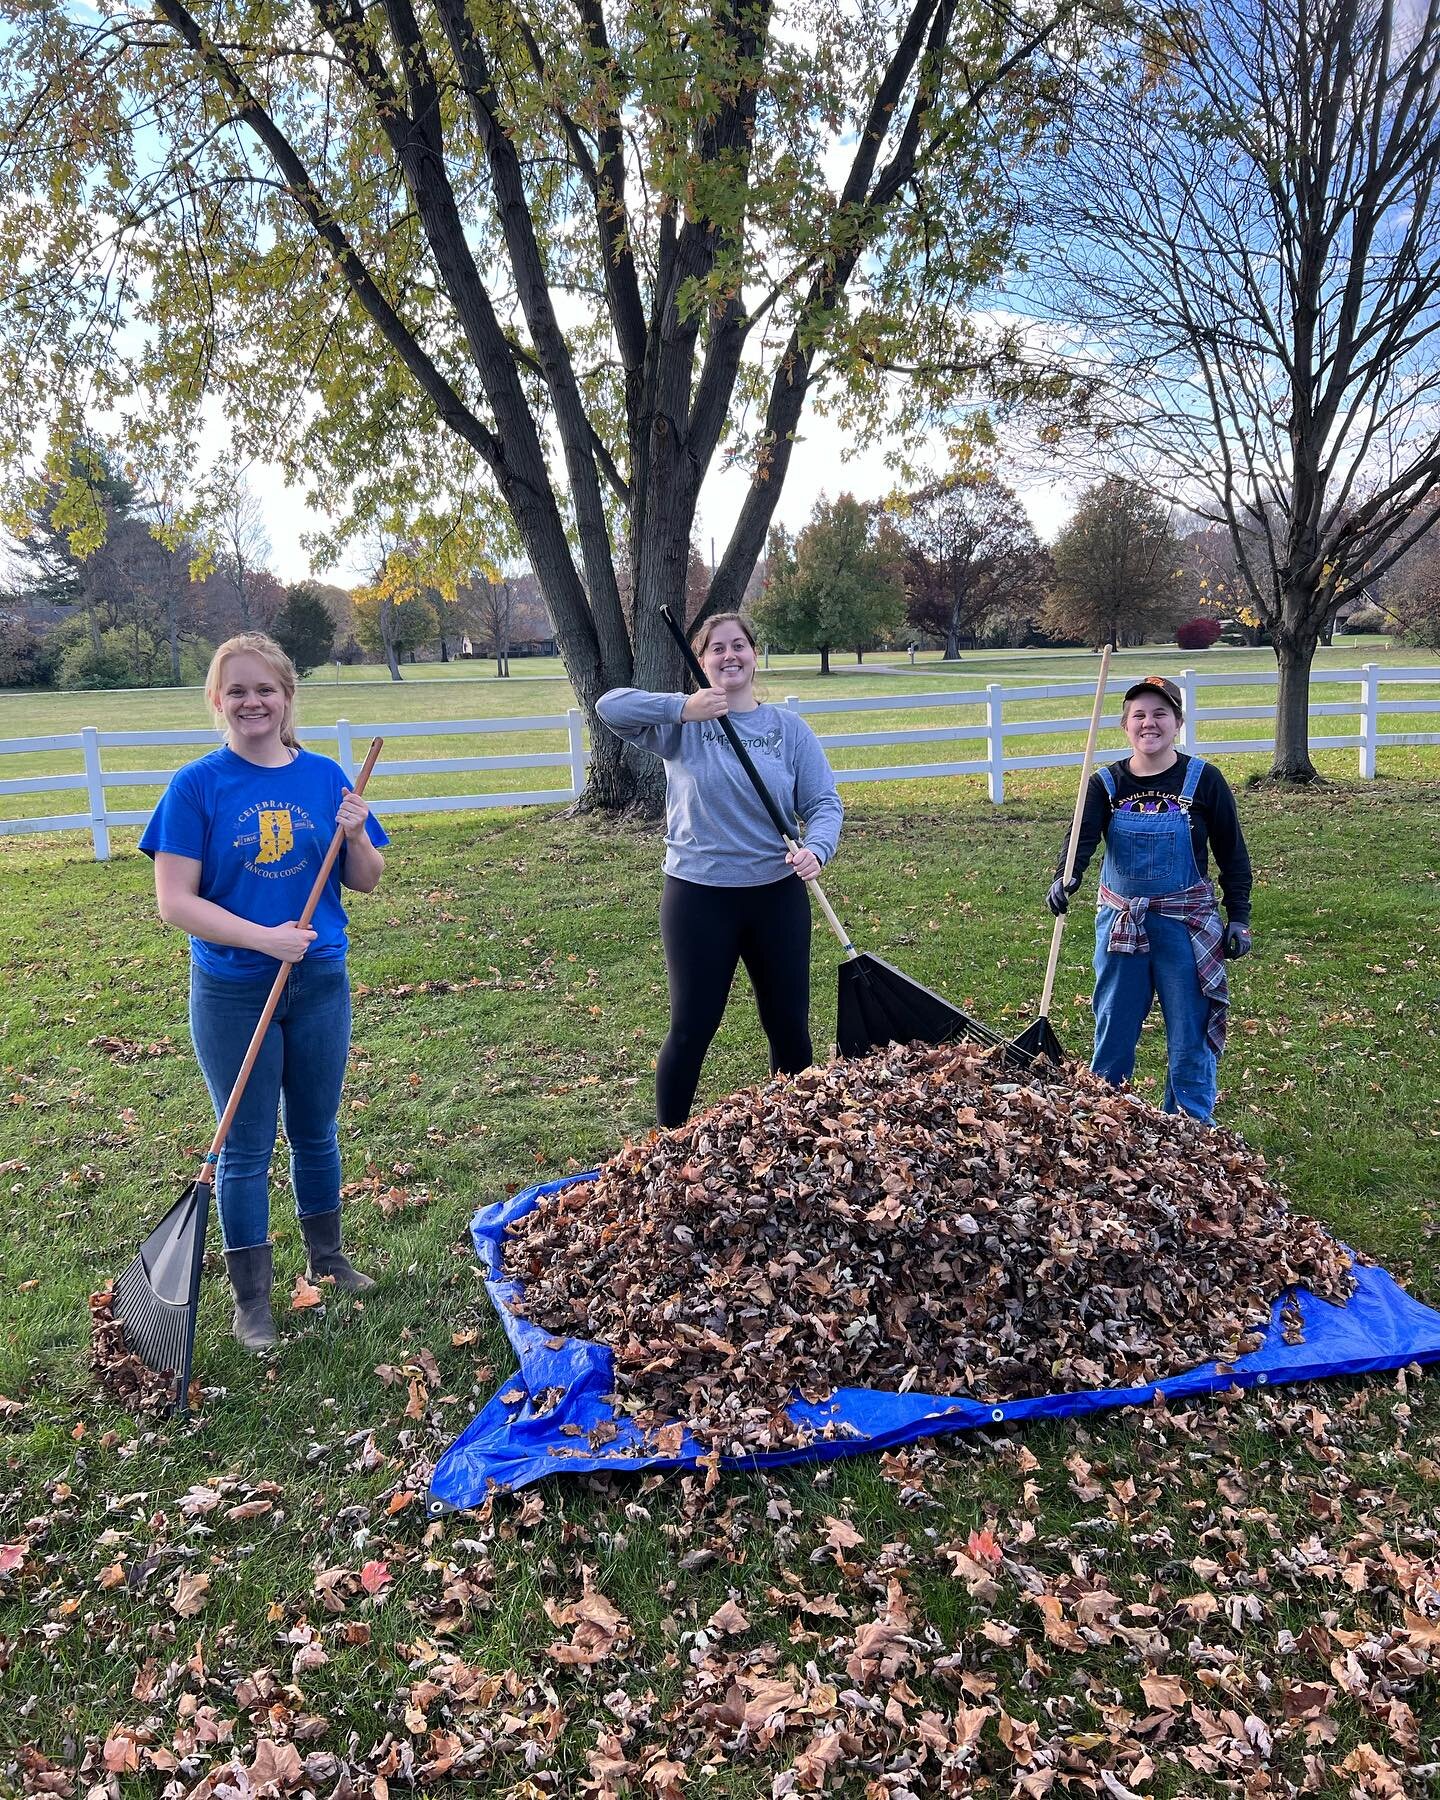 We raked a lot of leaves and had a lot of laughs! Thanks to all who came out to help prepare our West Lafayette neighbors&rsquo; homes for winter!🍂🍁🌿@winterizationatpurdue